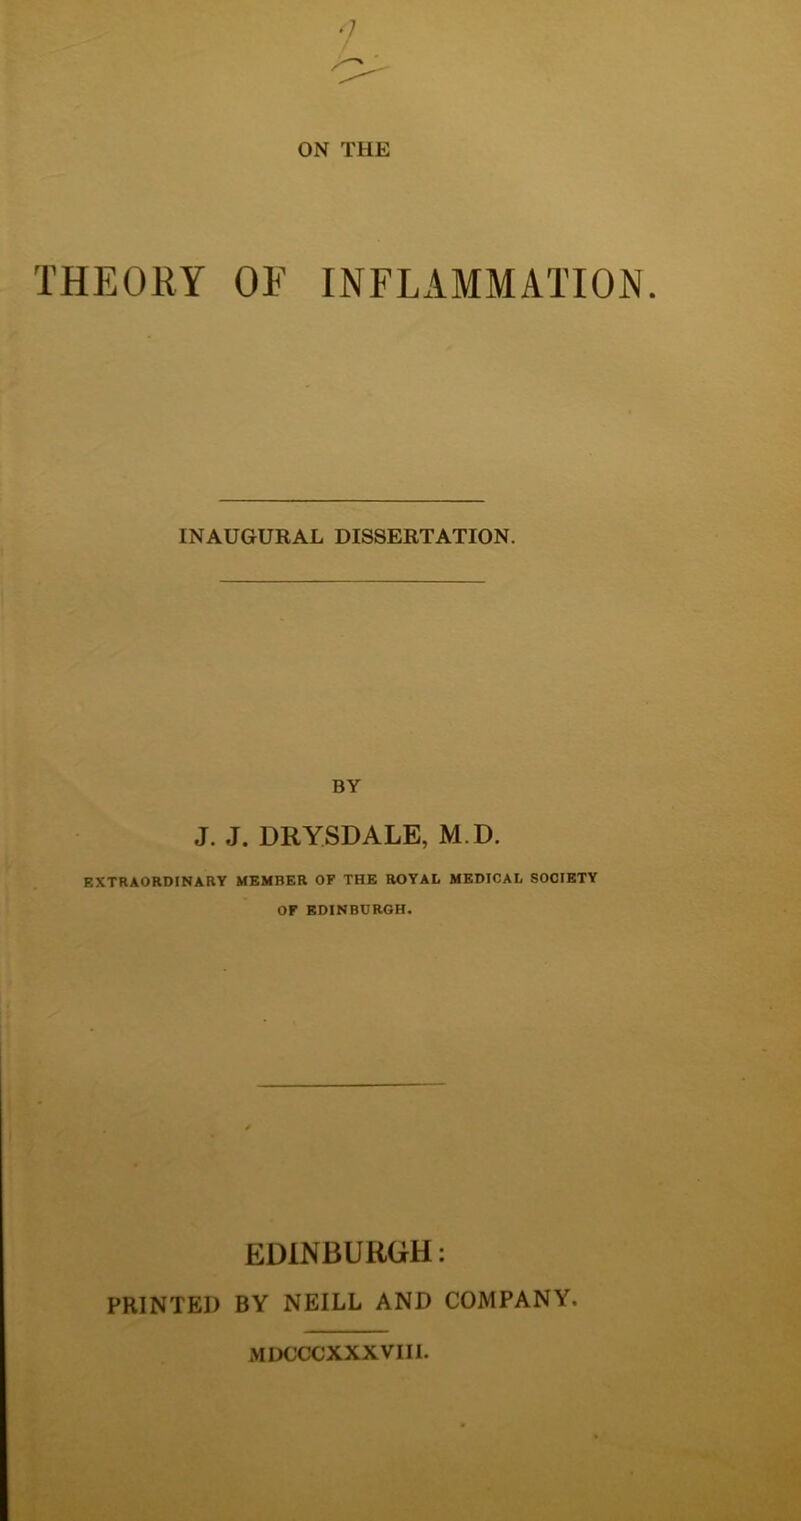 ON THE THEORY OF INFLAMMATION. INAUGURAL DISSERTATION. BY J. J. DRYSDALE, M.D. EXTRAORDINARY MEMBER OF THE ROYAL MEDICAL SOCIETY OF EDINBURGH. EDINBURGH: PRINTED BY NEILL AND COMPANY. MDCCCXXXVIII.